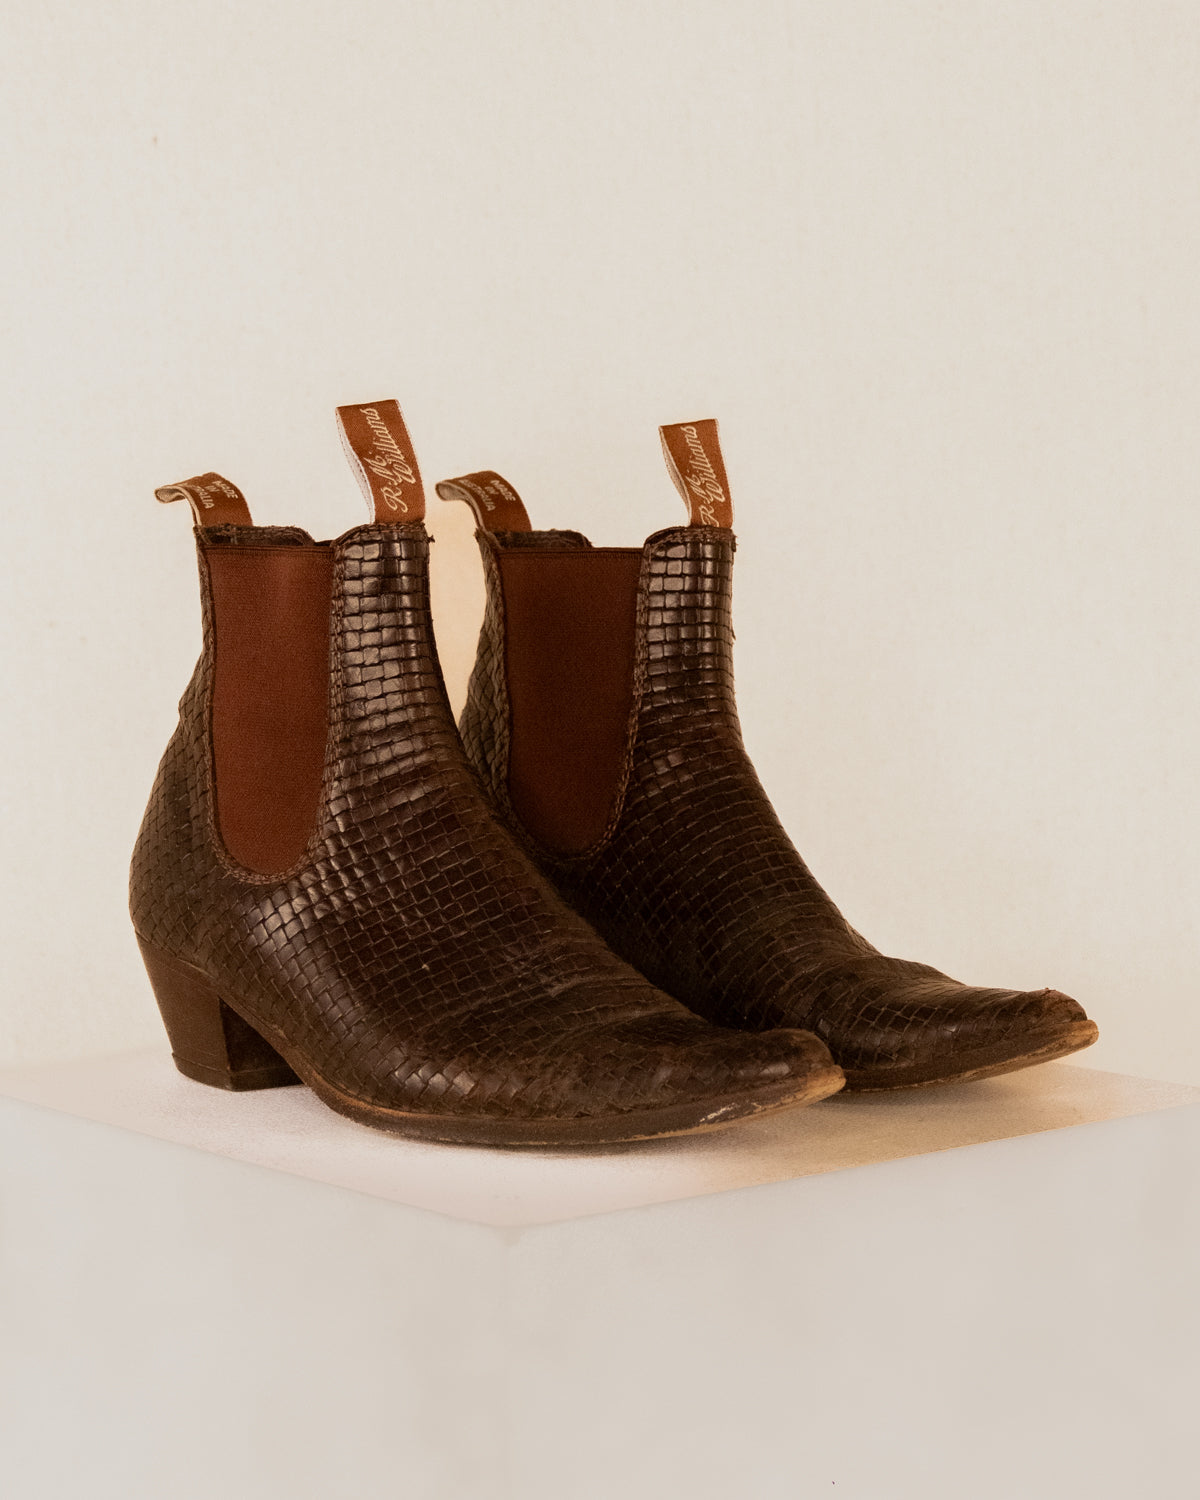 Rare Woven Leather RM Williams Boots